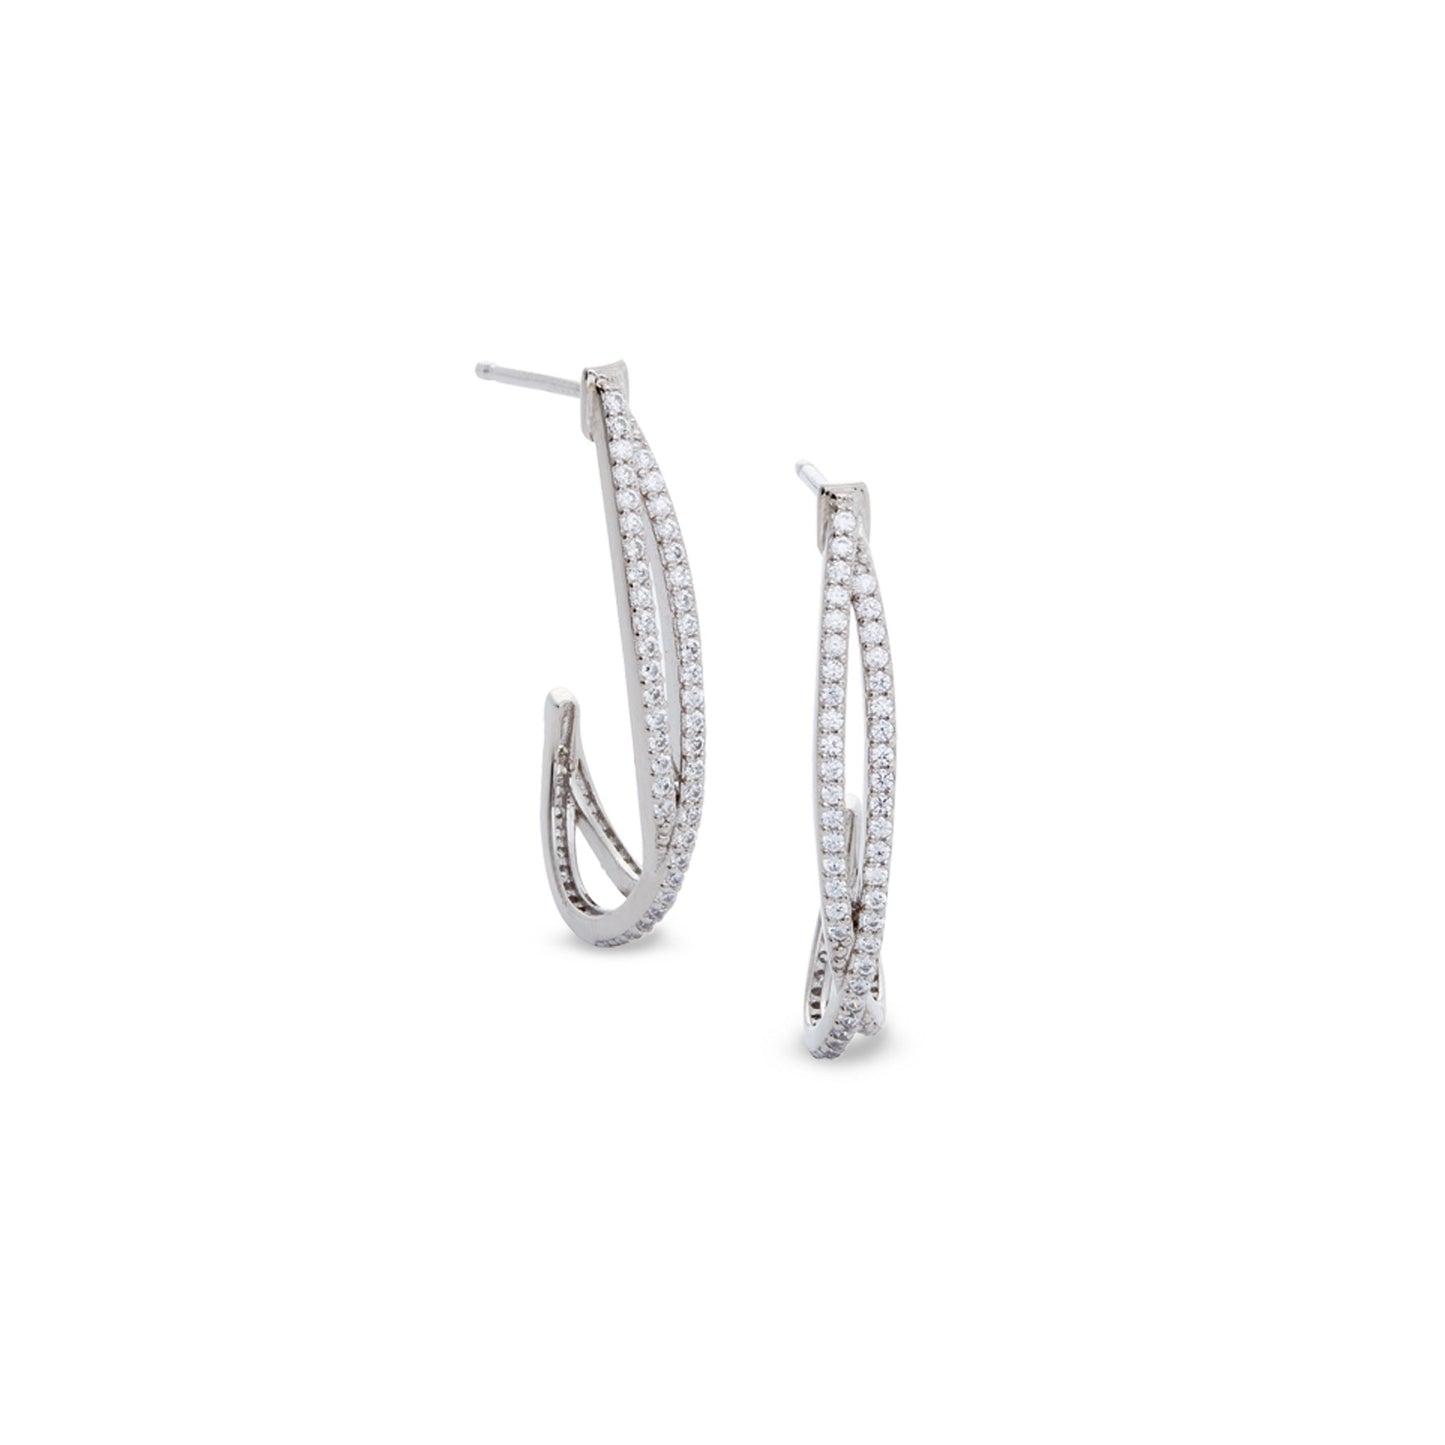 A criss cross half hoop earrings with 132 simulated diamonds displayed on a neutral white background.